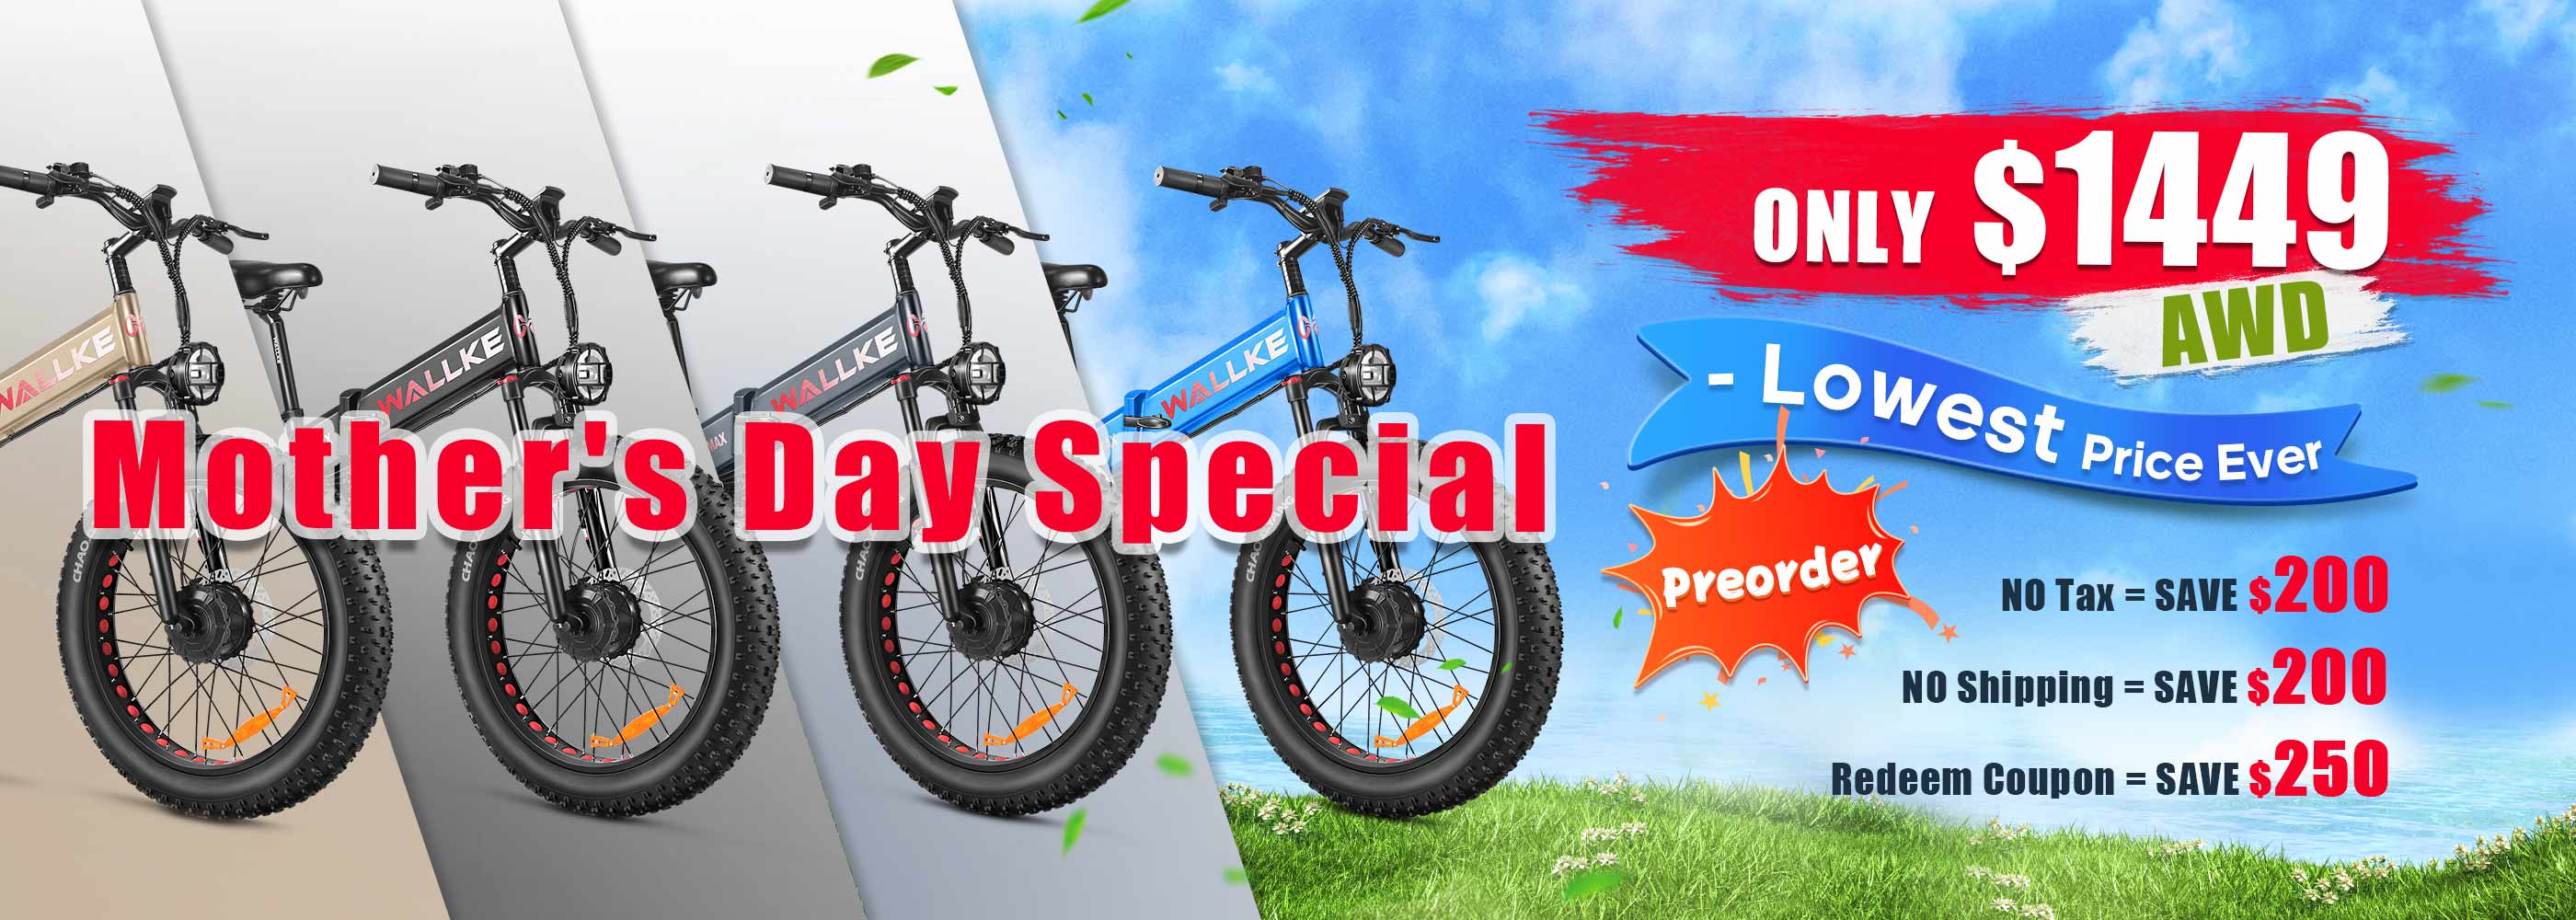 mothersday-special-X3-03